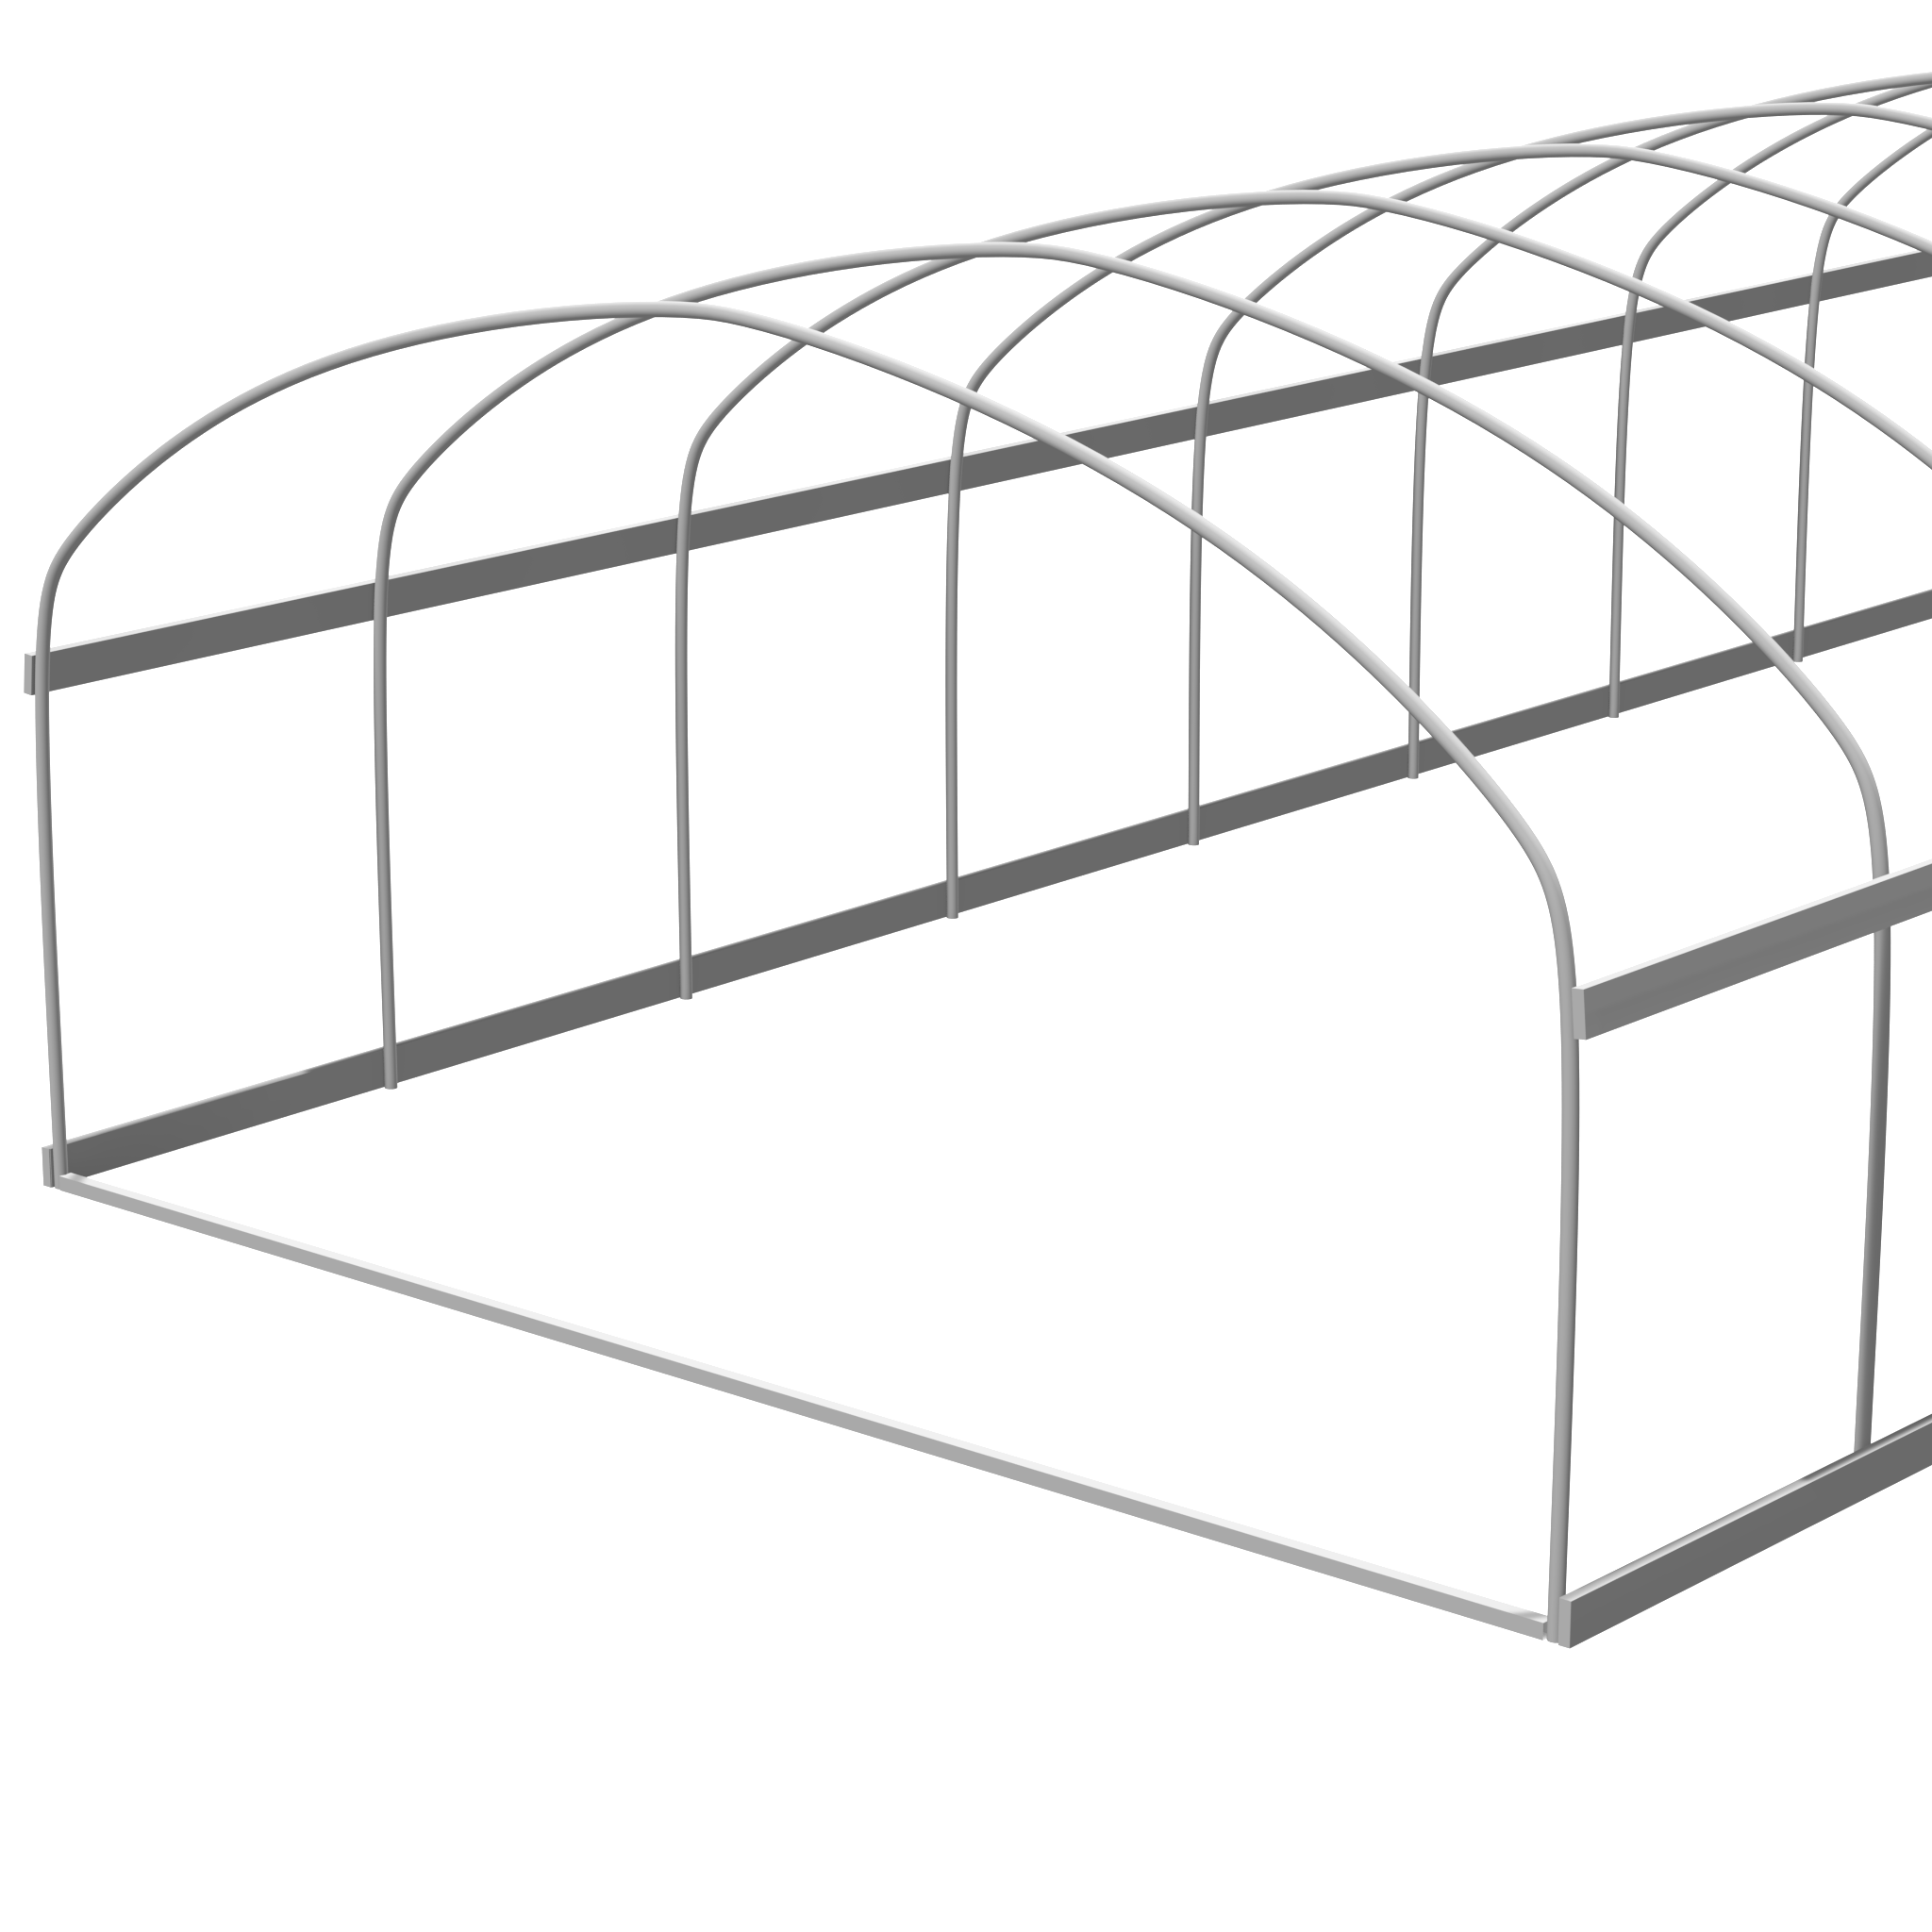 20'x100' Greenhouse Frame Quonset